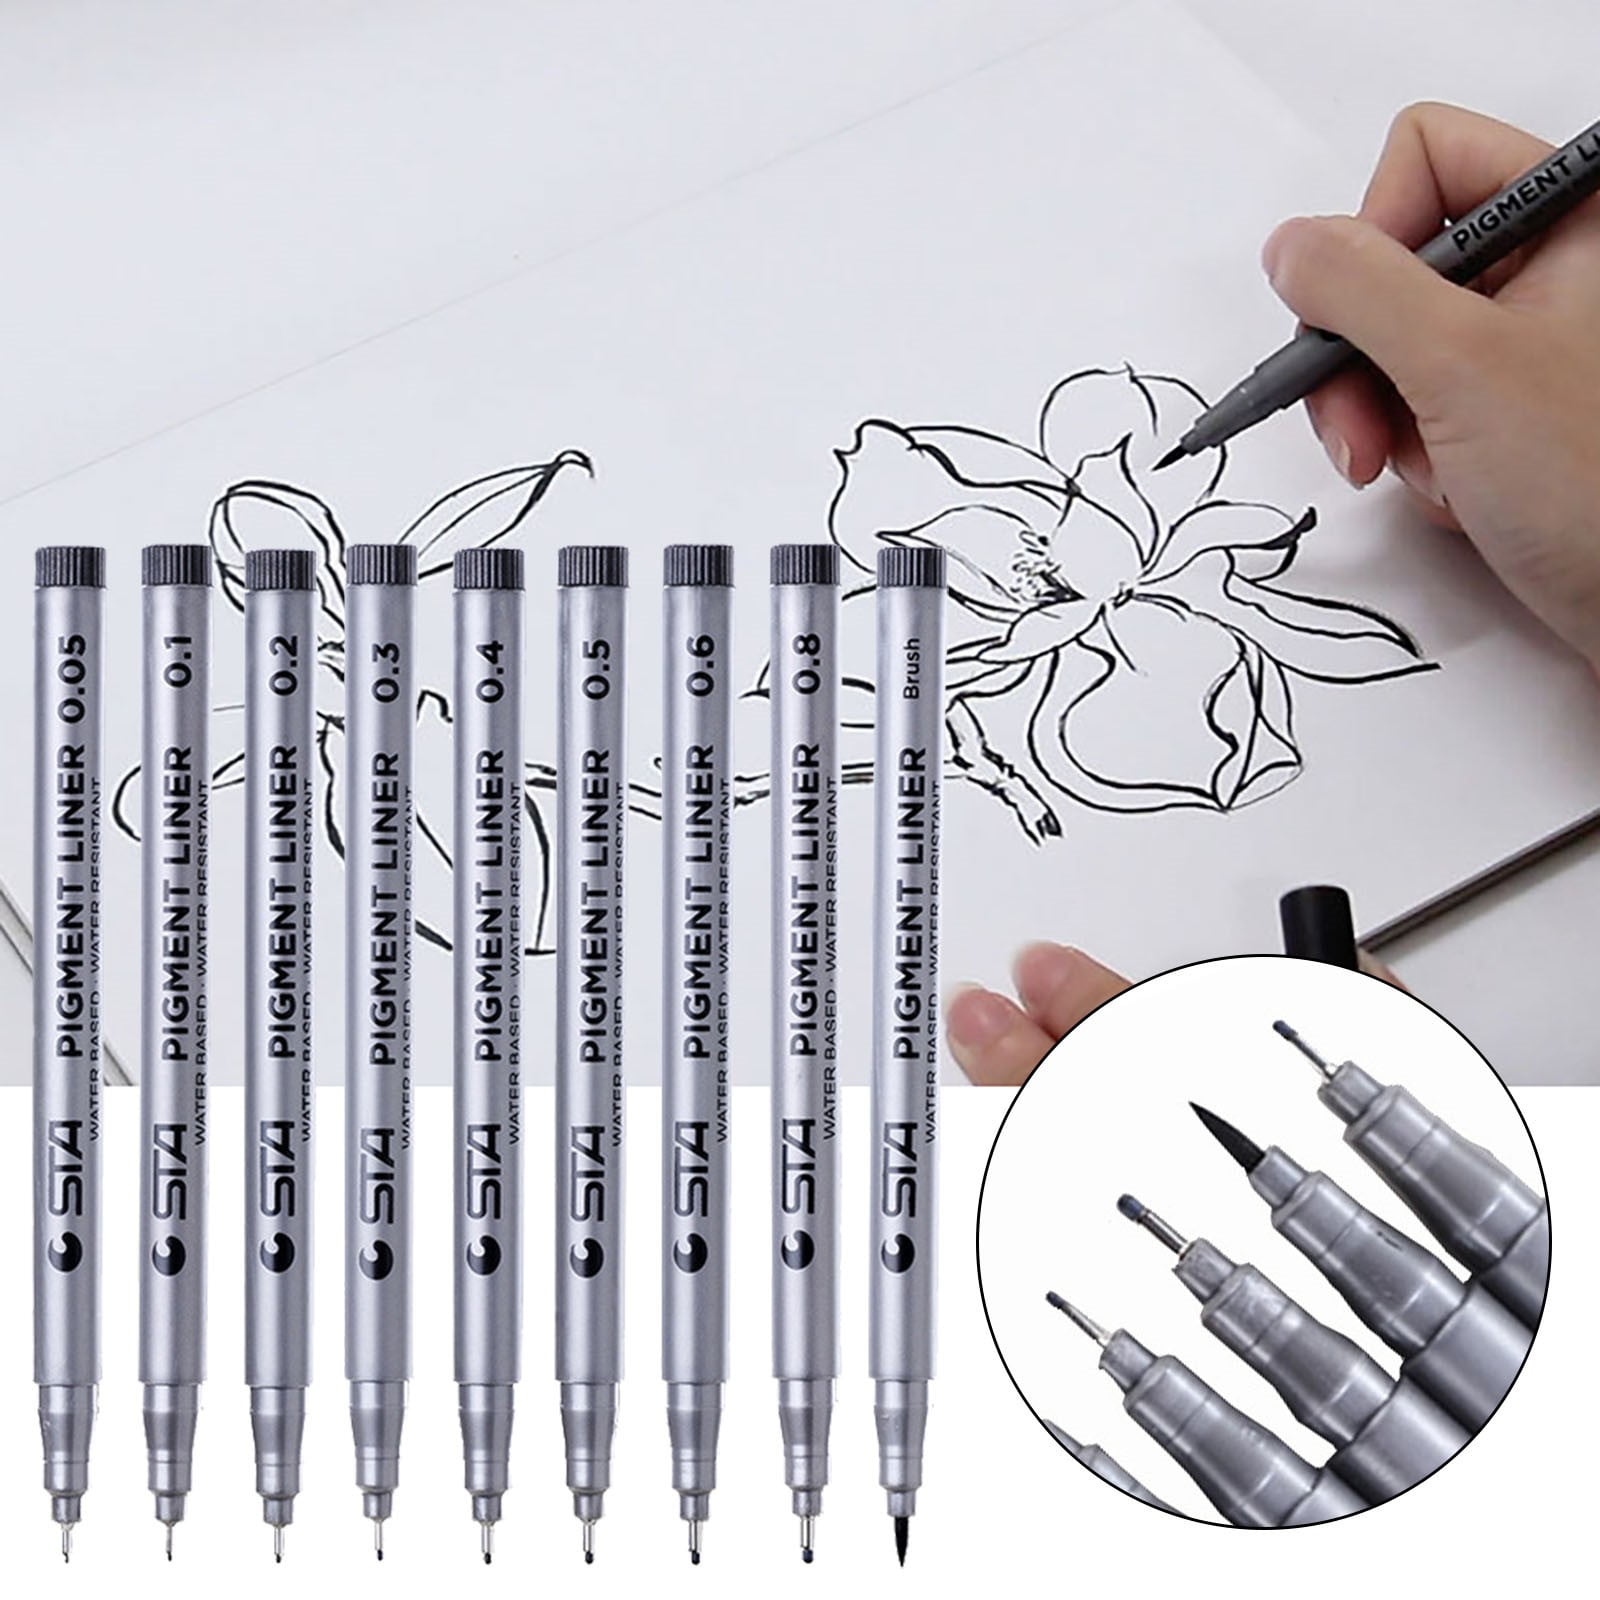 Sketch Pens Guide: Sketch Pens Types for Art and Drawing - Podium School